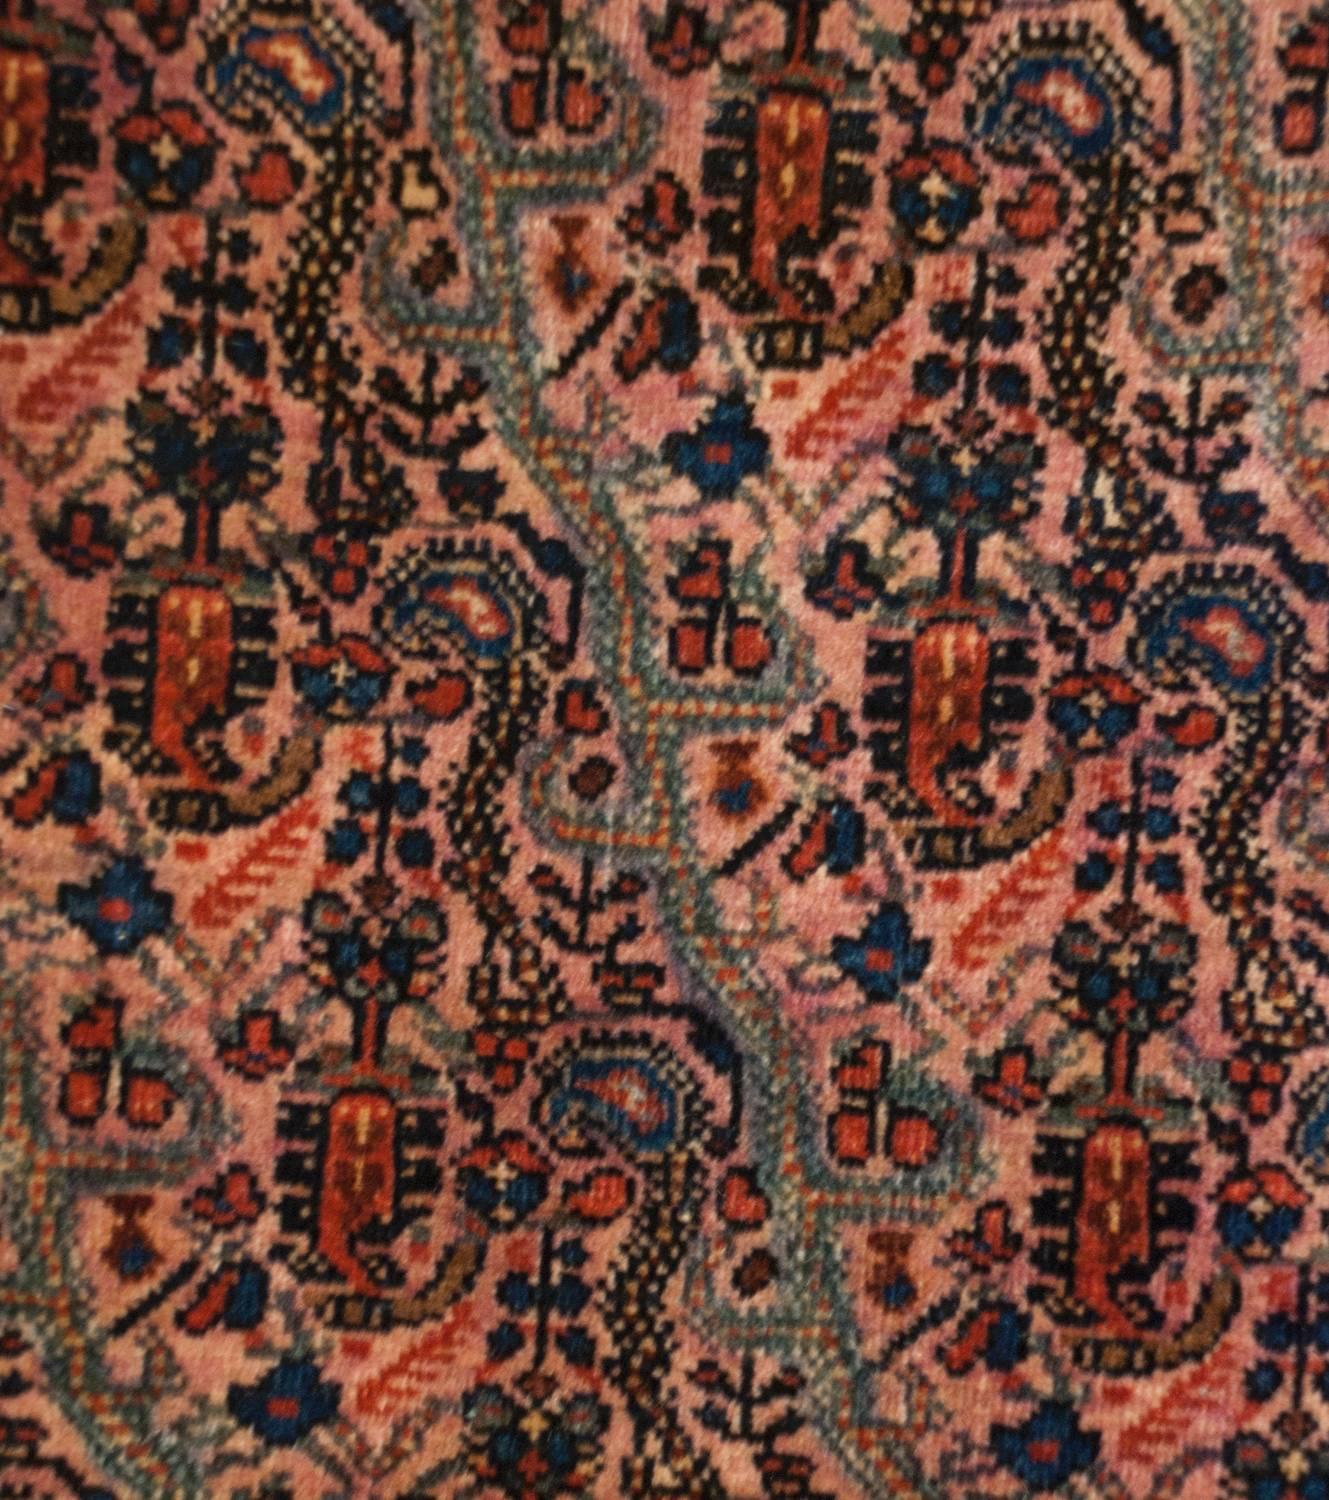 An unusual and extraordinary 19th century Persian Sarouk Farahan rug with an incredible central field woven with a multicolored paisley pattern amidst a field of scrolling and flowering vines on a pale pink background. The four corners of the field